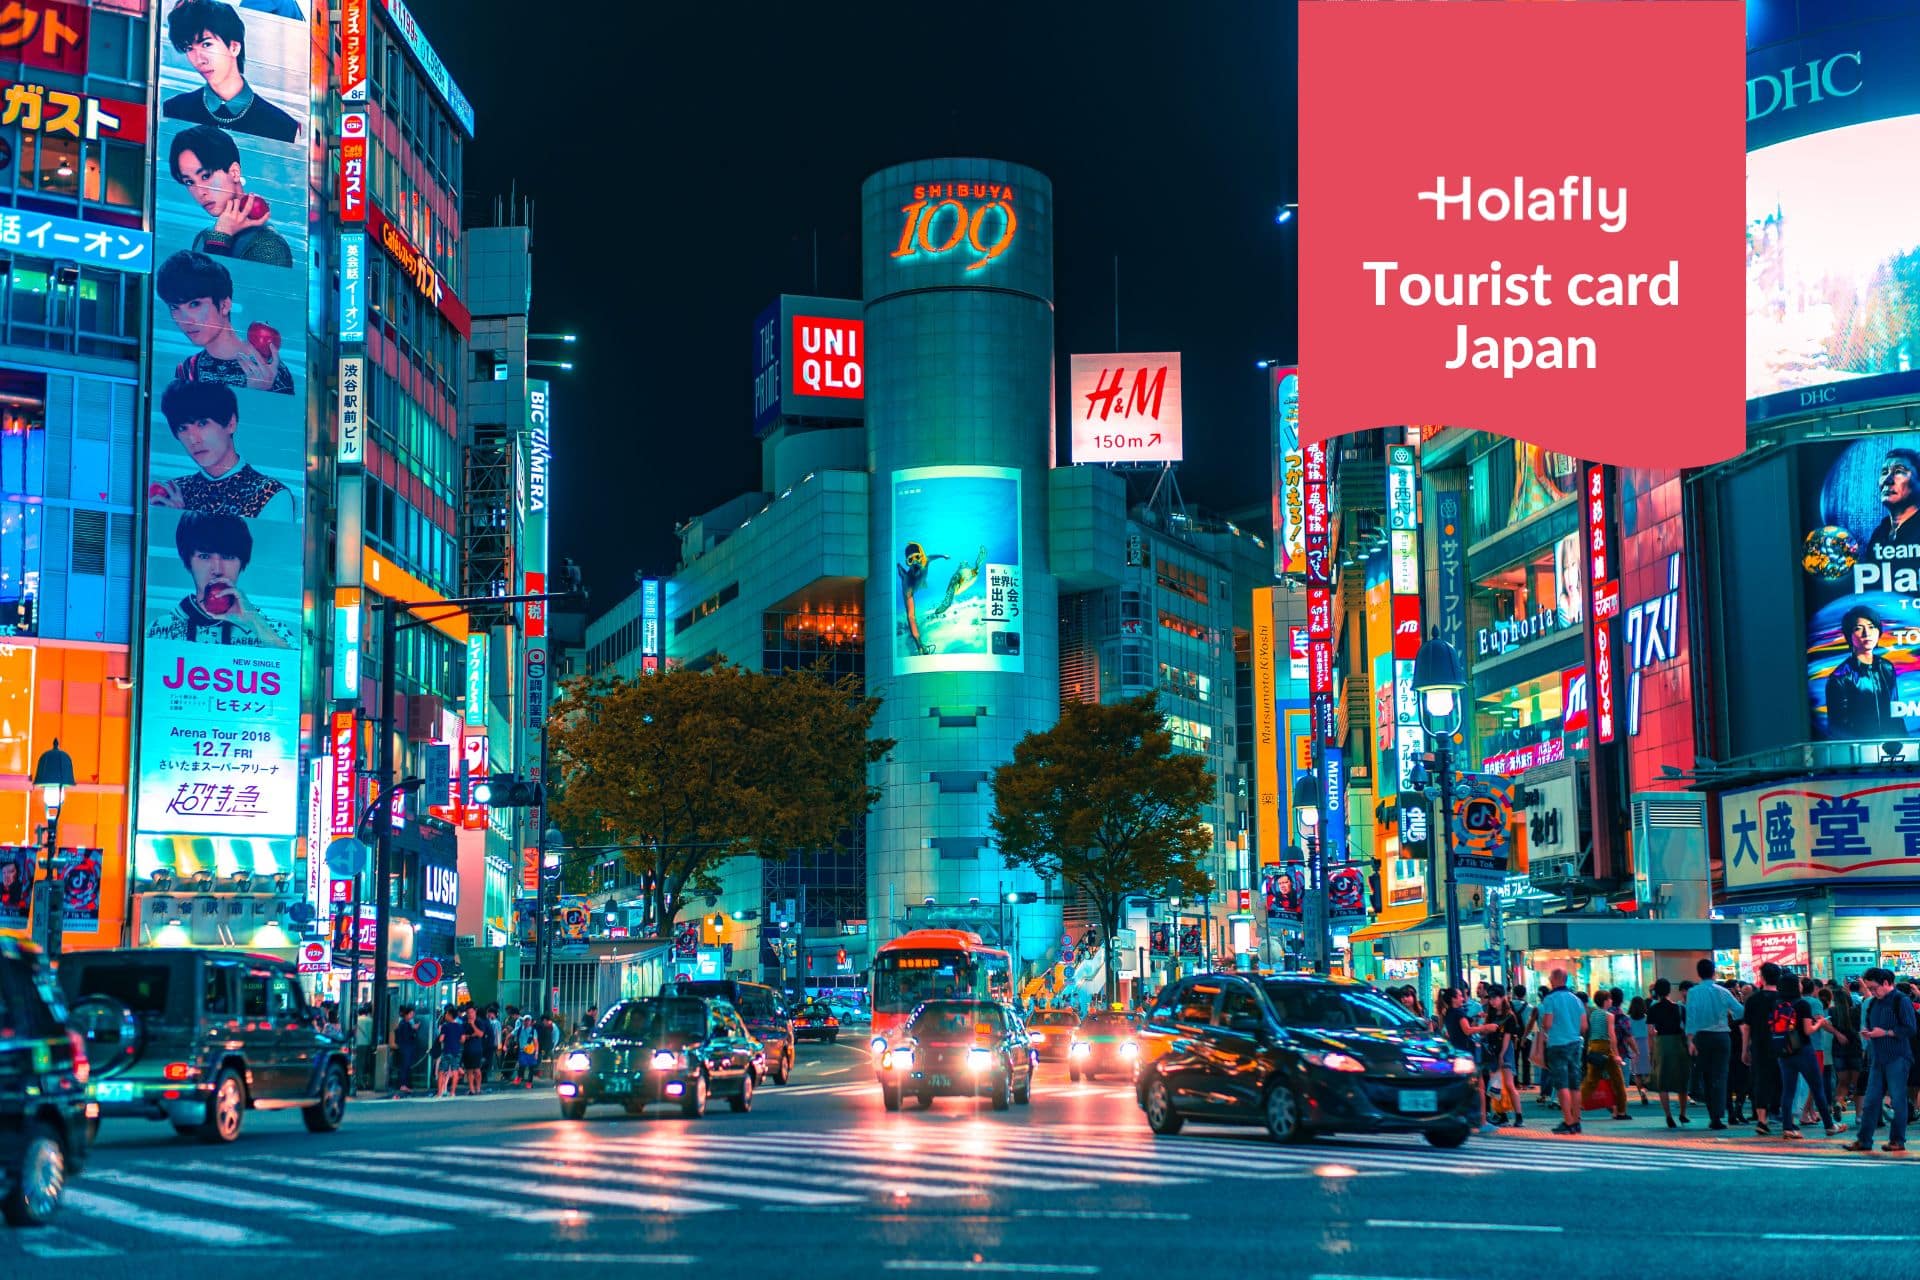 Tourist Cards in Japan: Which one to choose? - Holafly